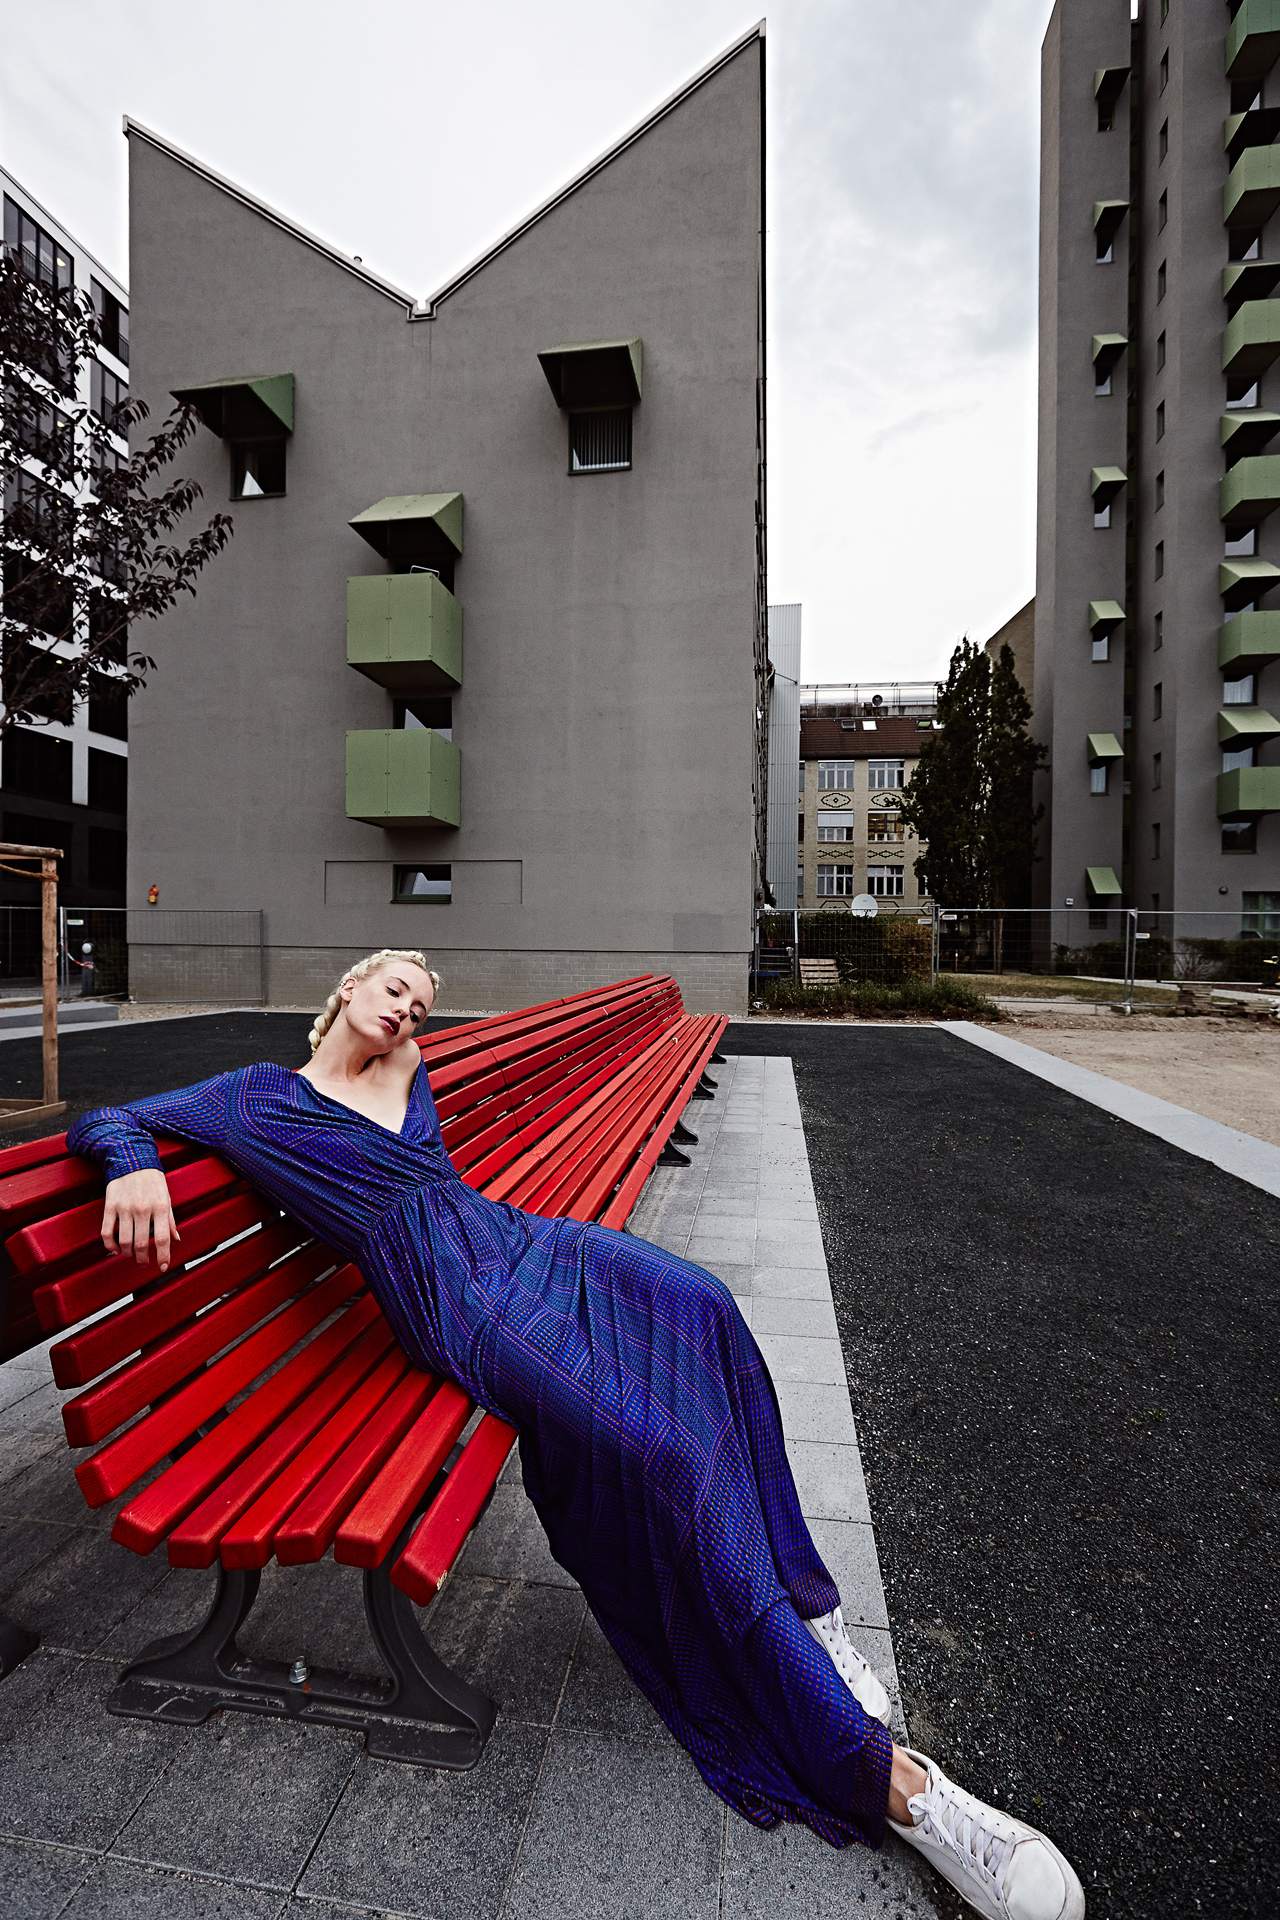 Fashion photography by David Hatters for Frampesca